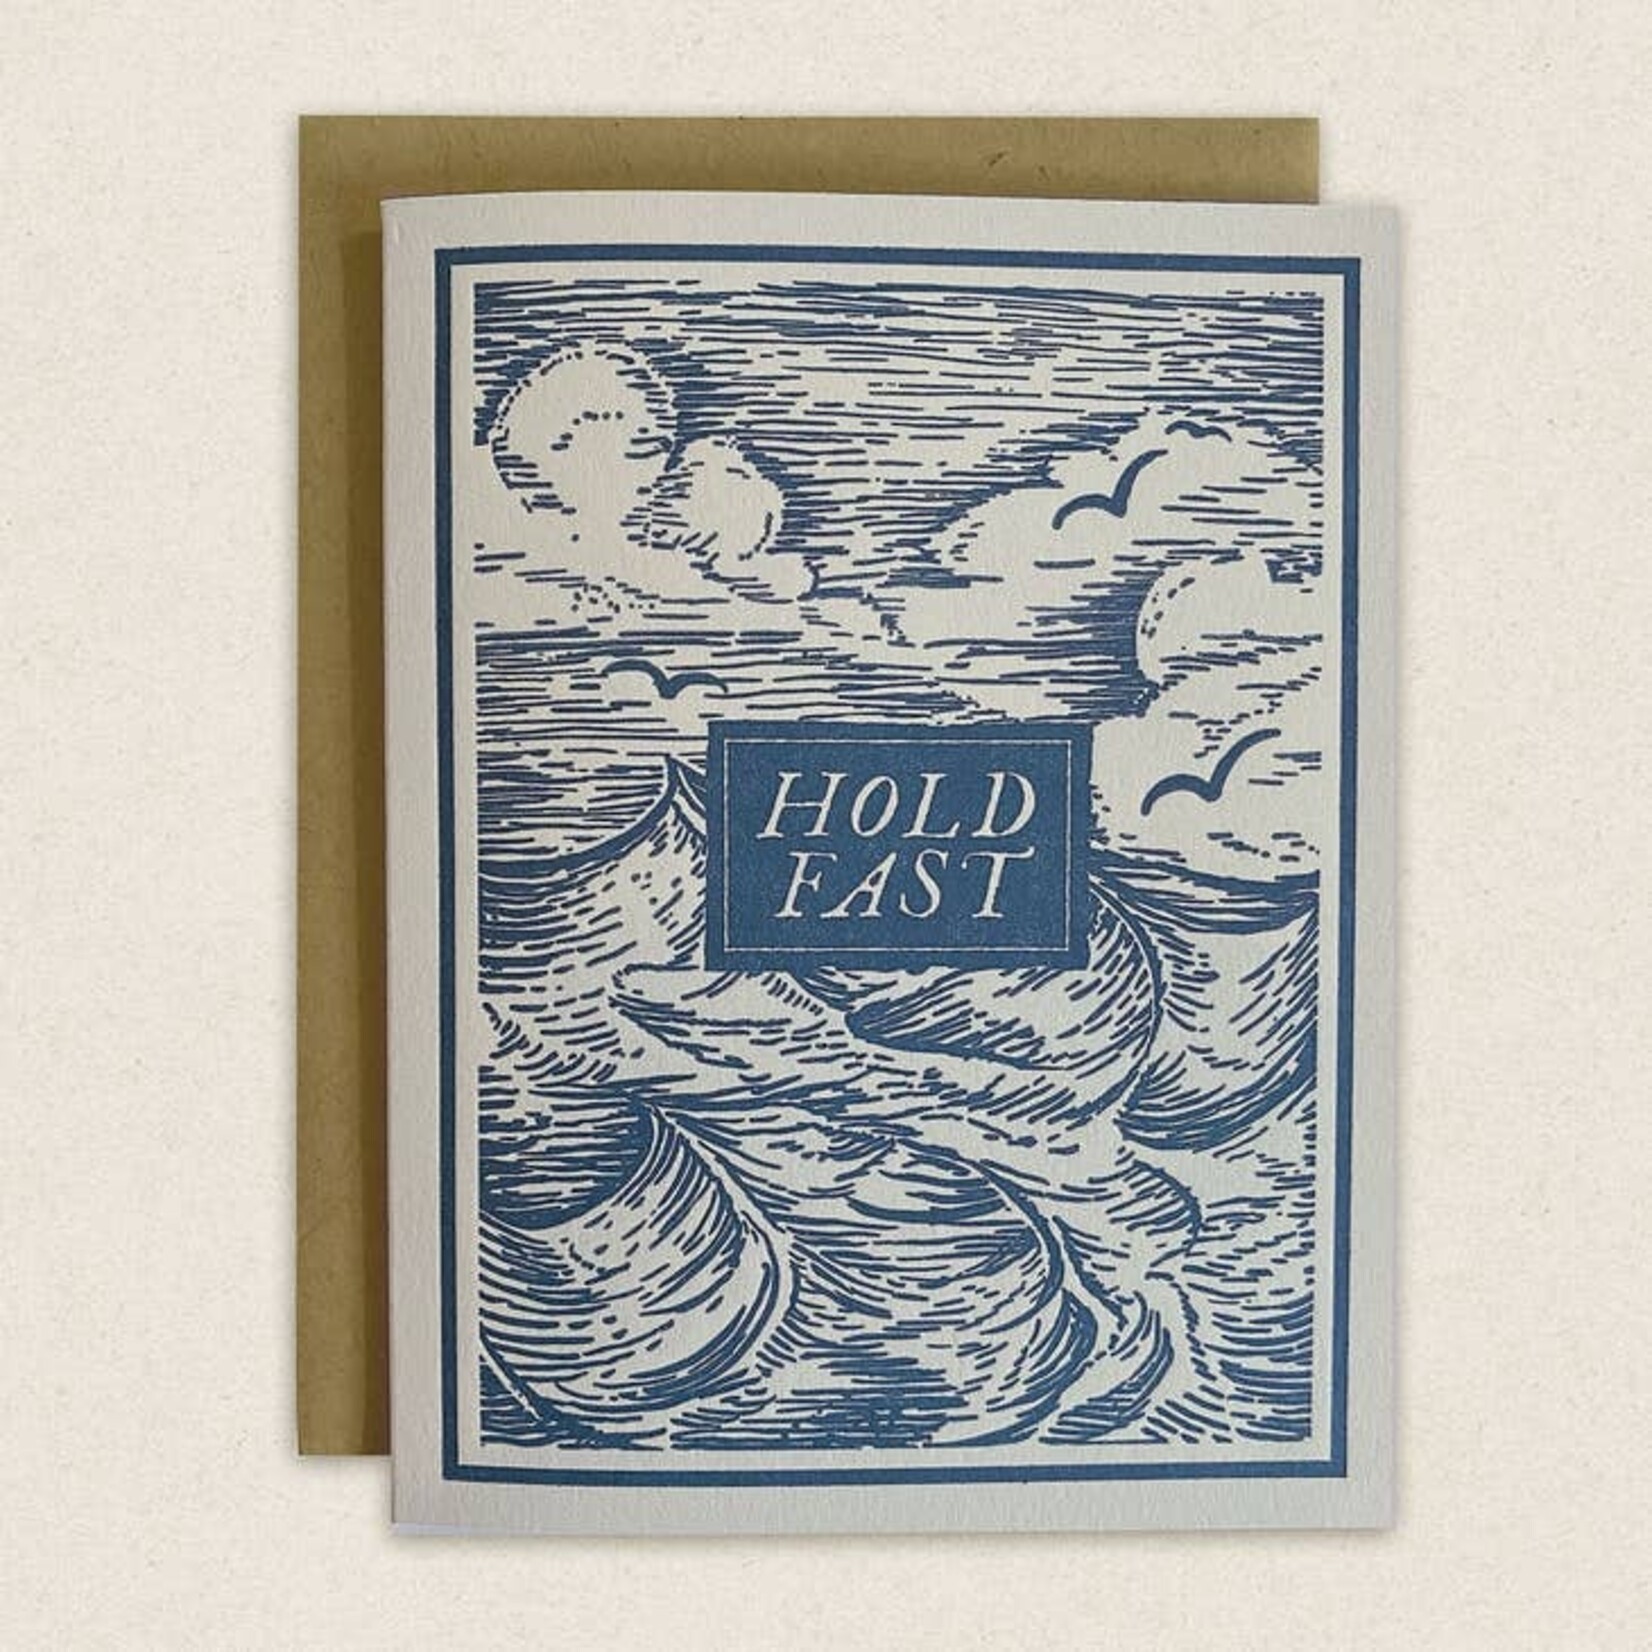 Greeting Cards - General Hold Fast Encouragement